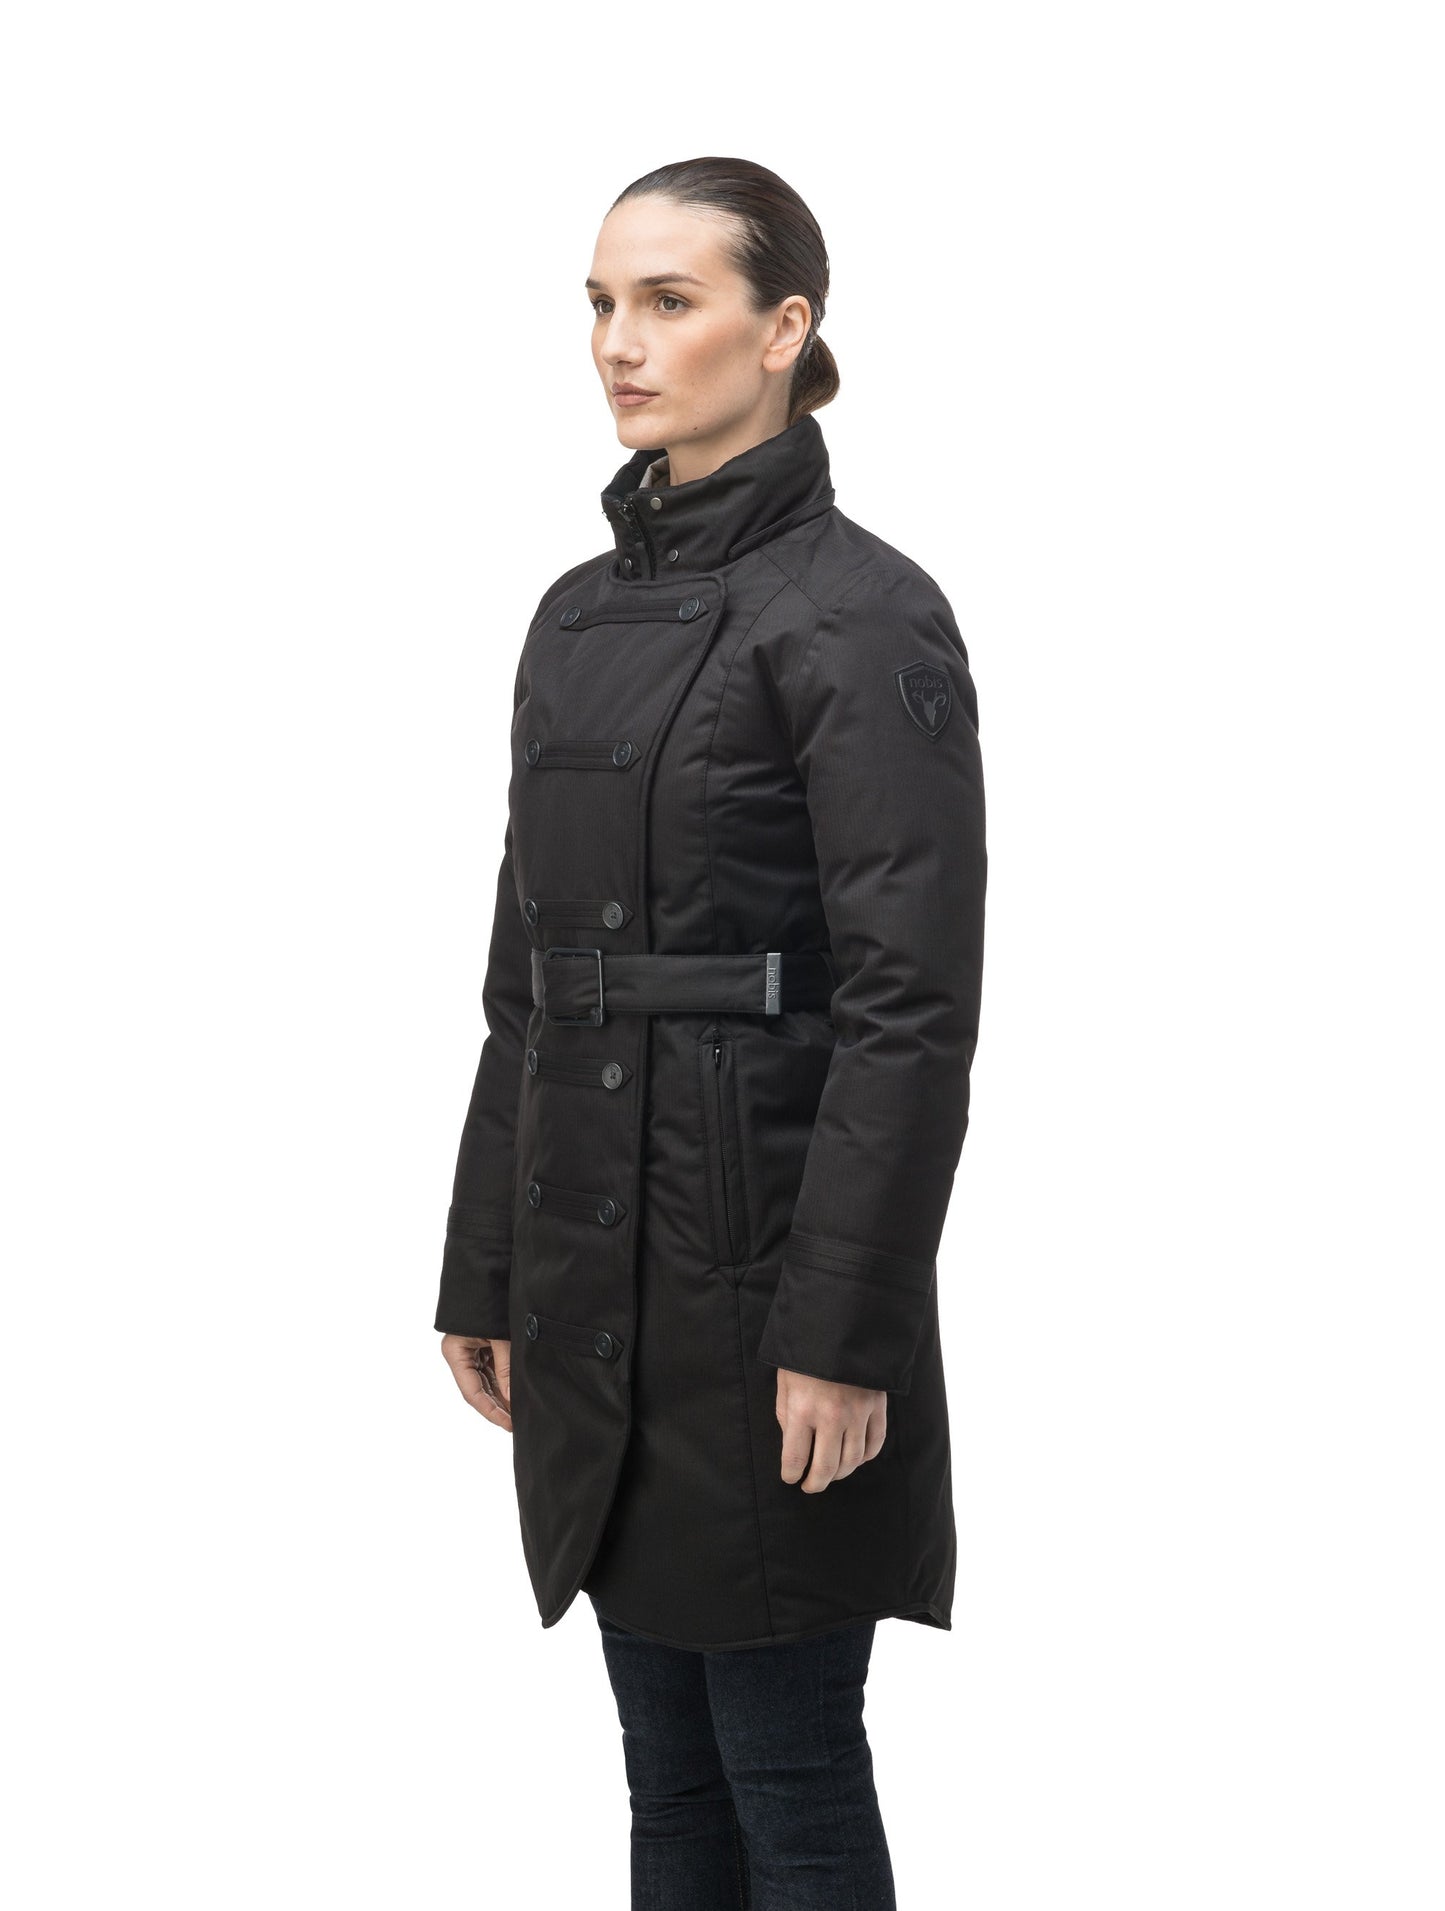 Women's down filled calf length parka with belted waist, and removable Rex Rabbit fur collar in CH Black